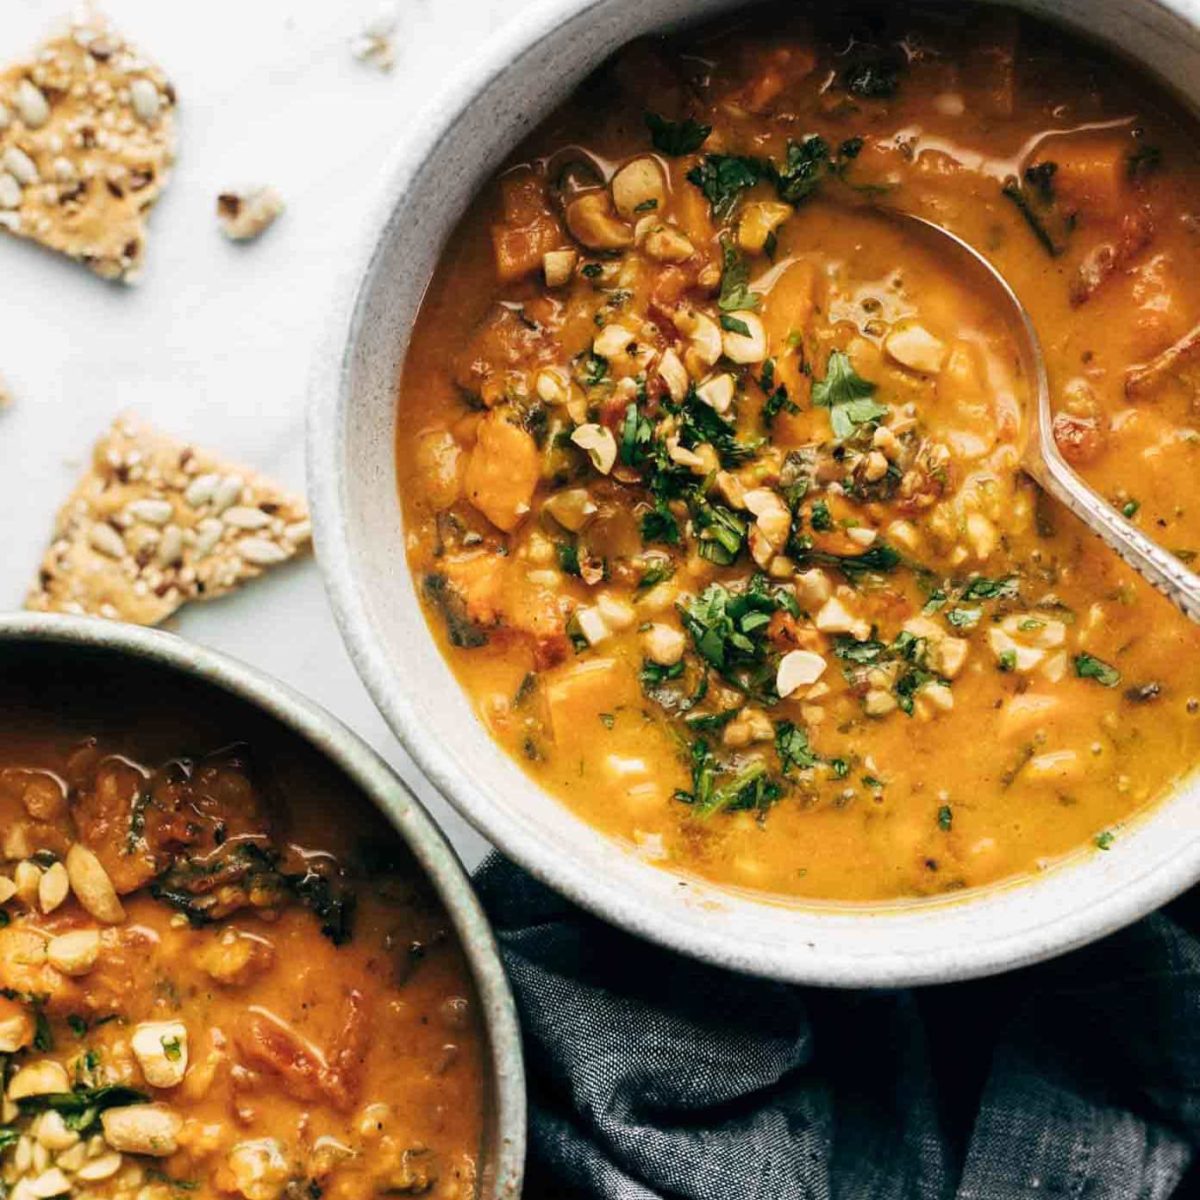 Spicy Peanut Soup with Sweet Potato + Kale Recipe - Pinch of Yum